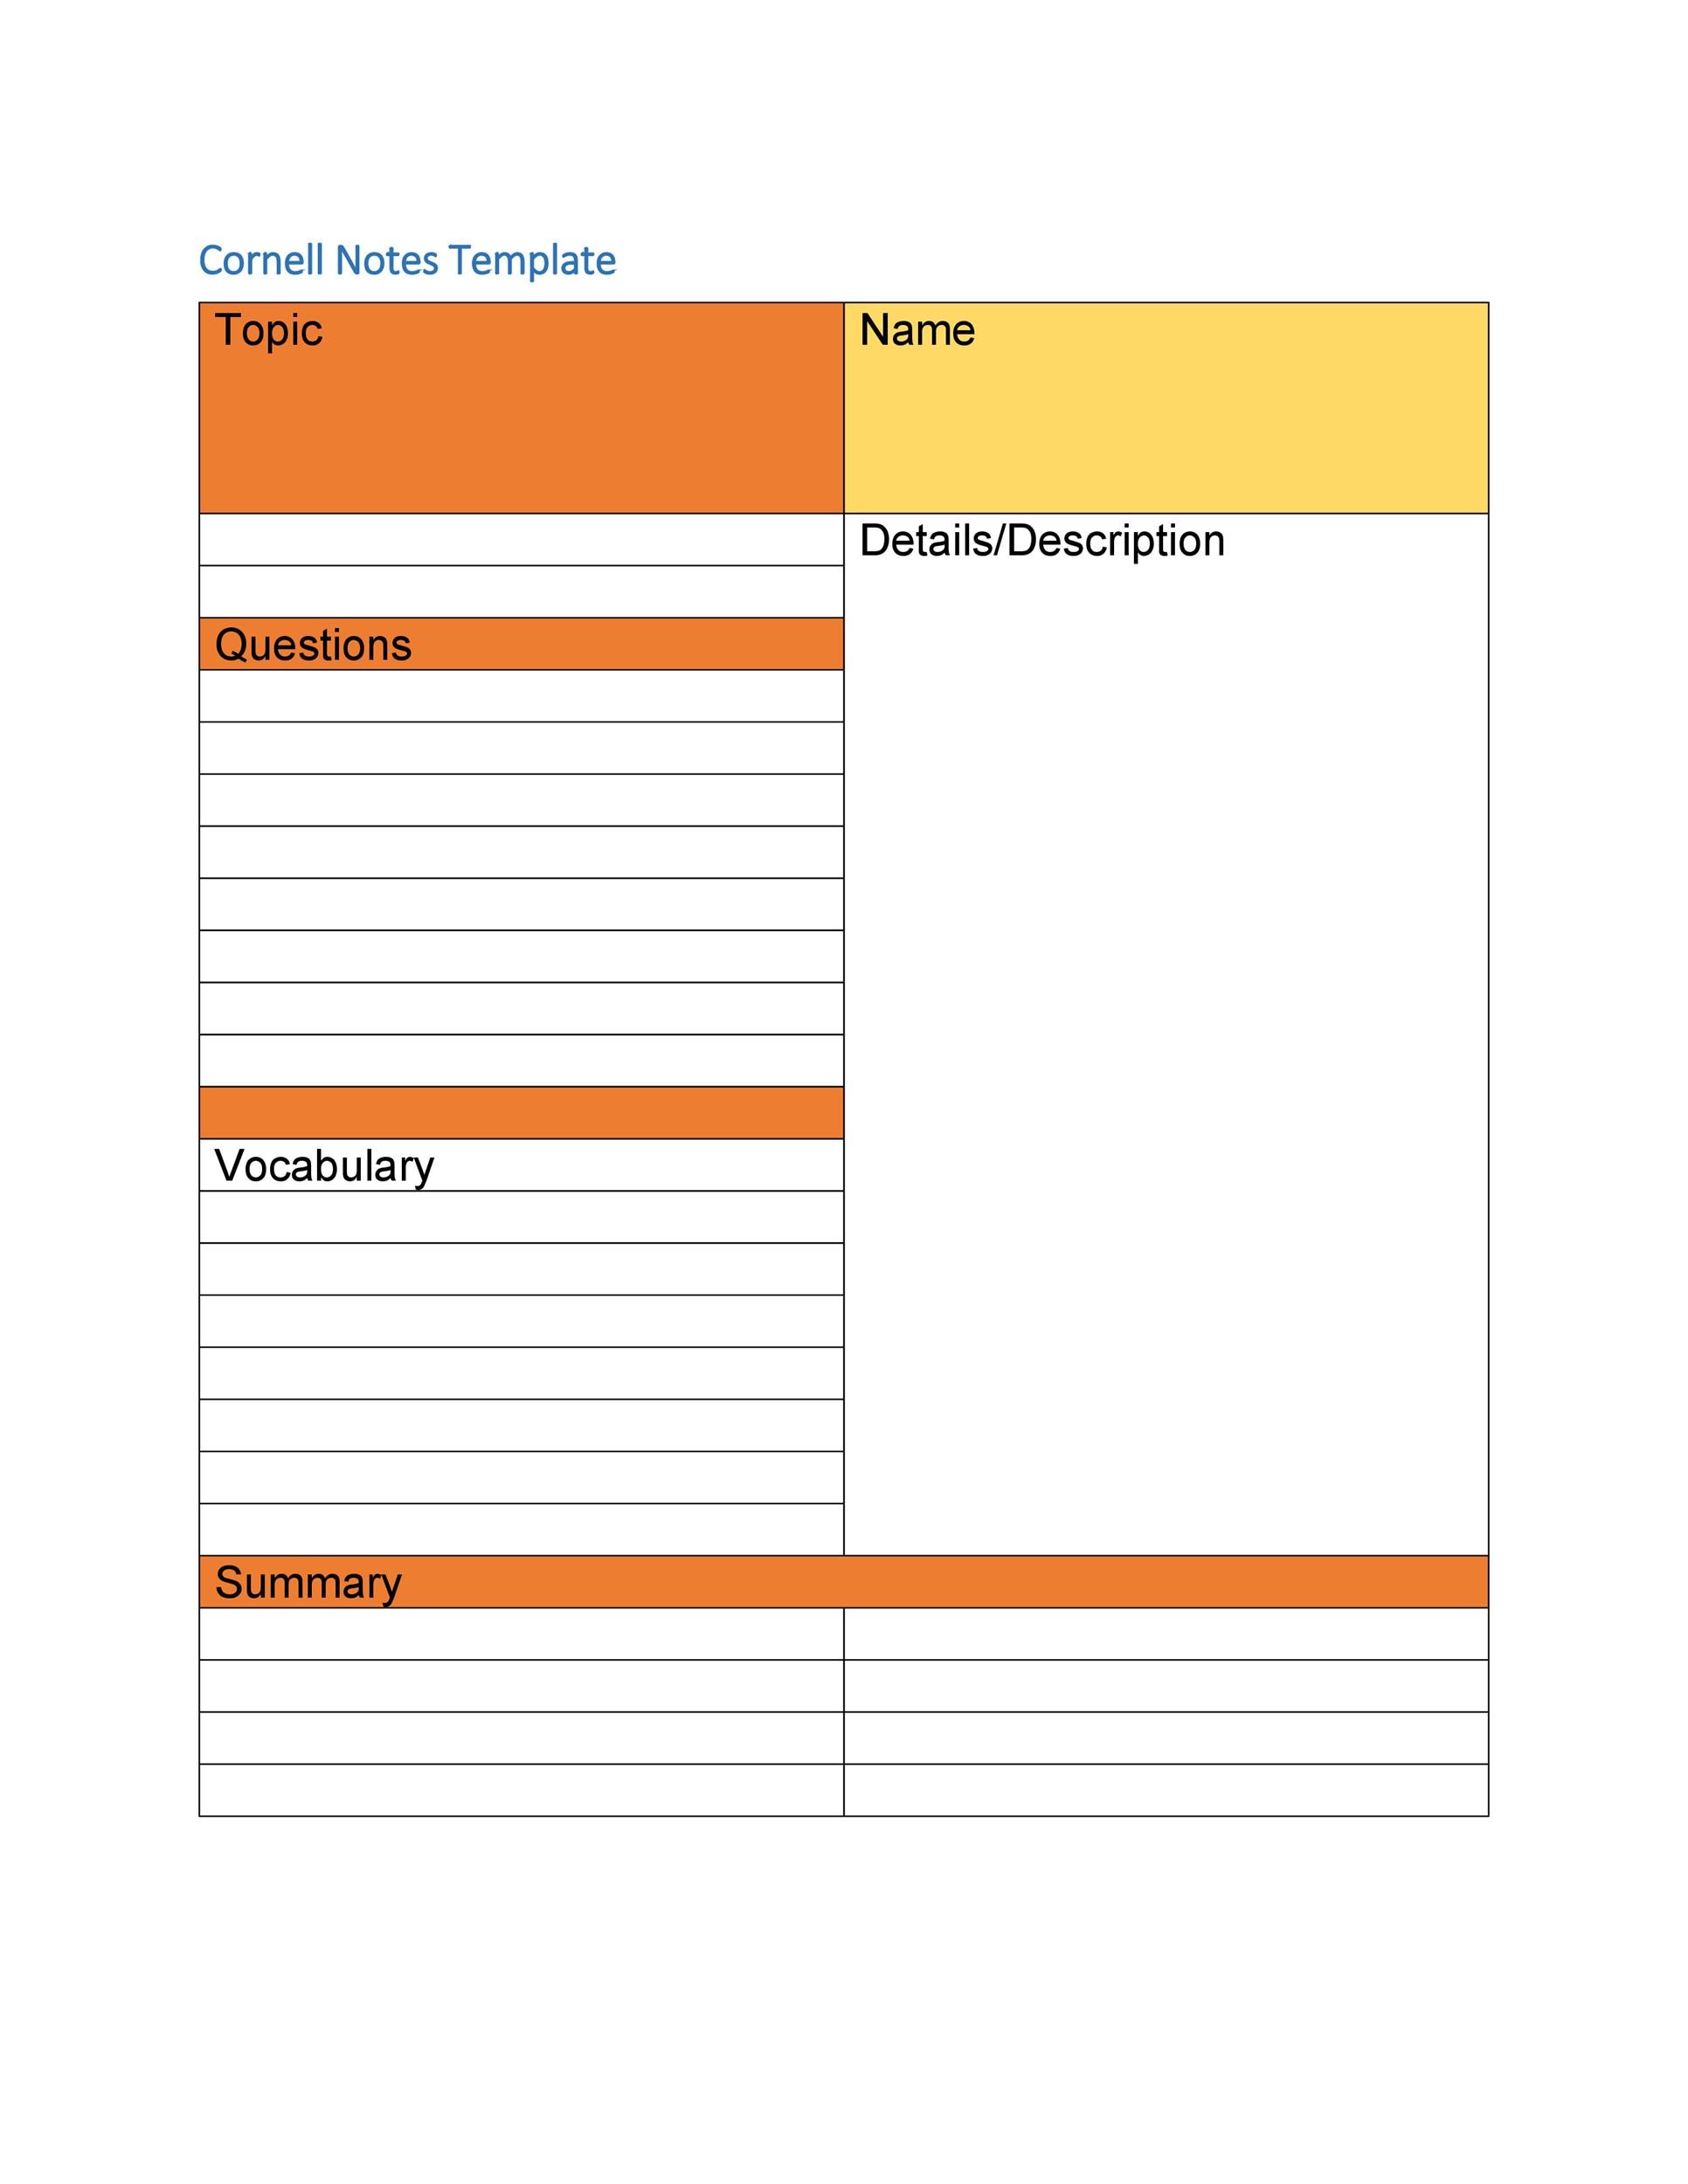 36 Cornell Notes Templates & Examples [Word, PDF] Template Lab